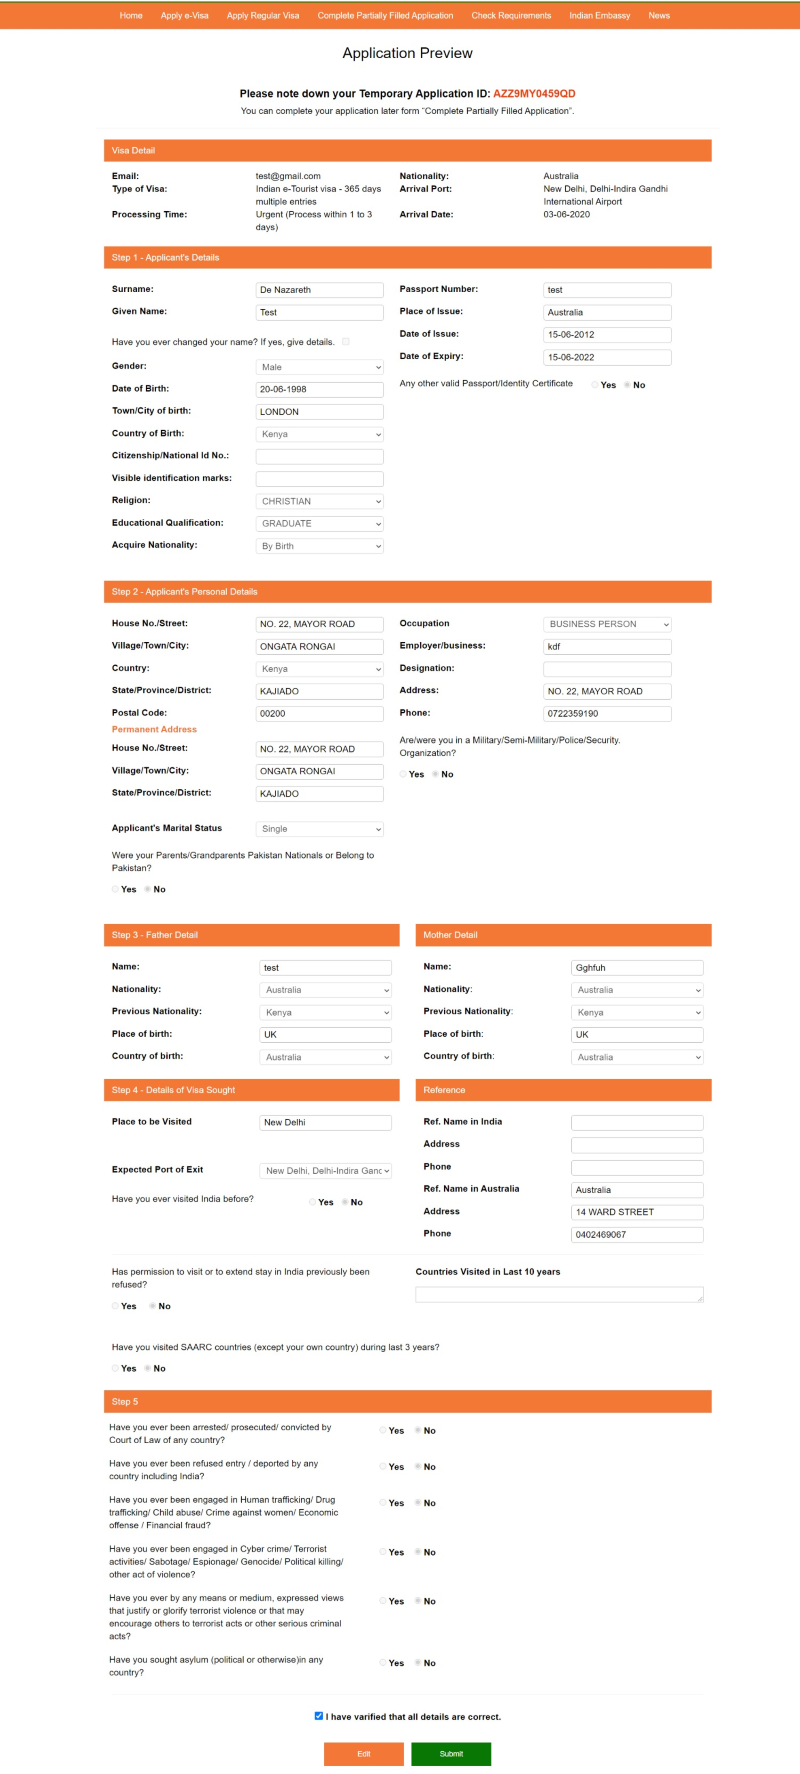 Indian visa application preview form